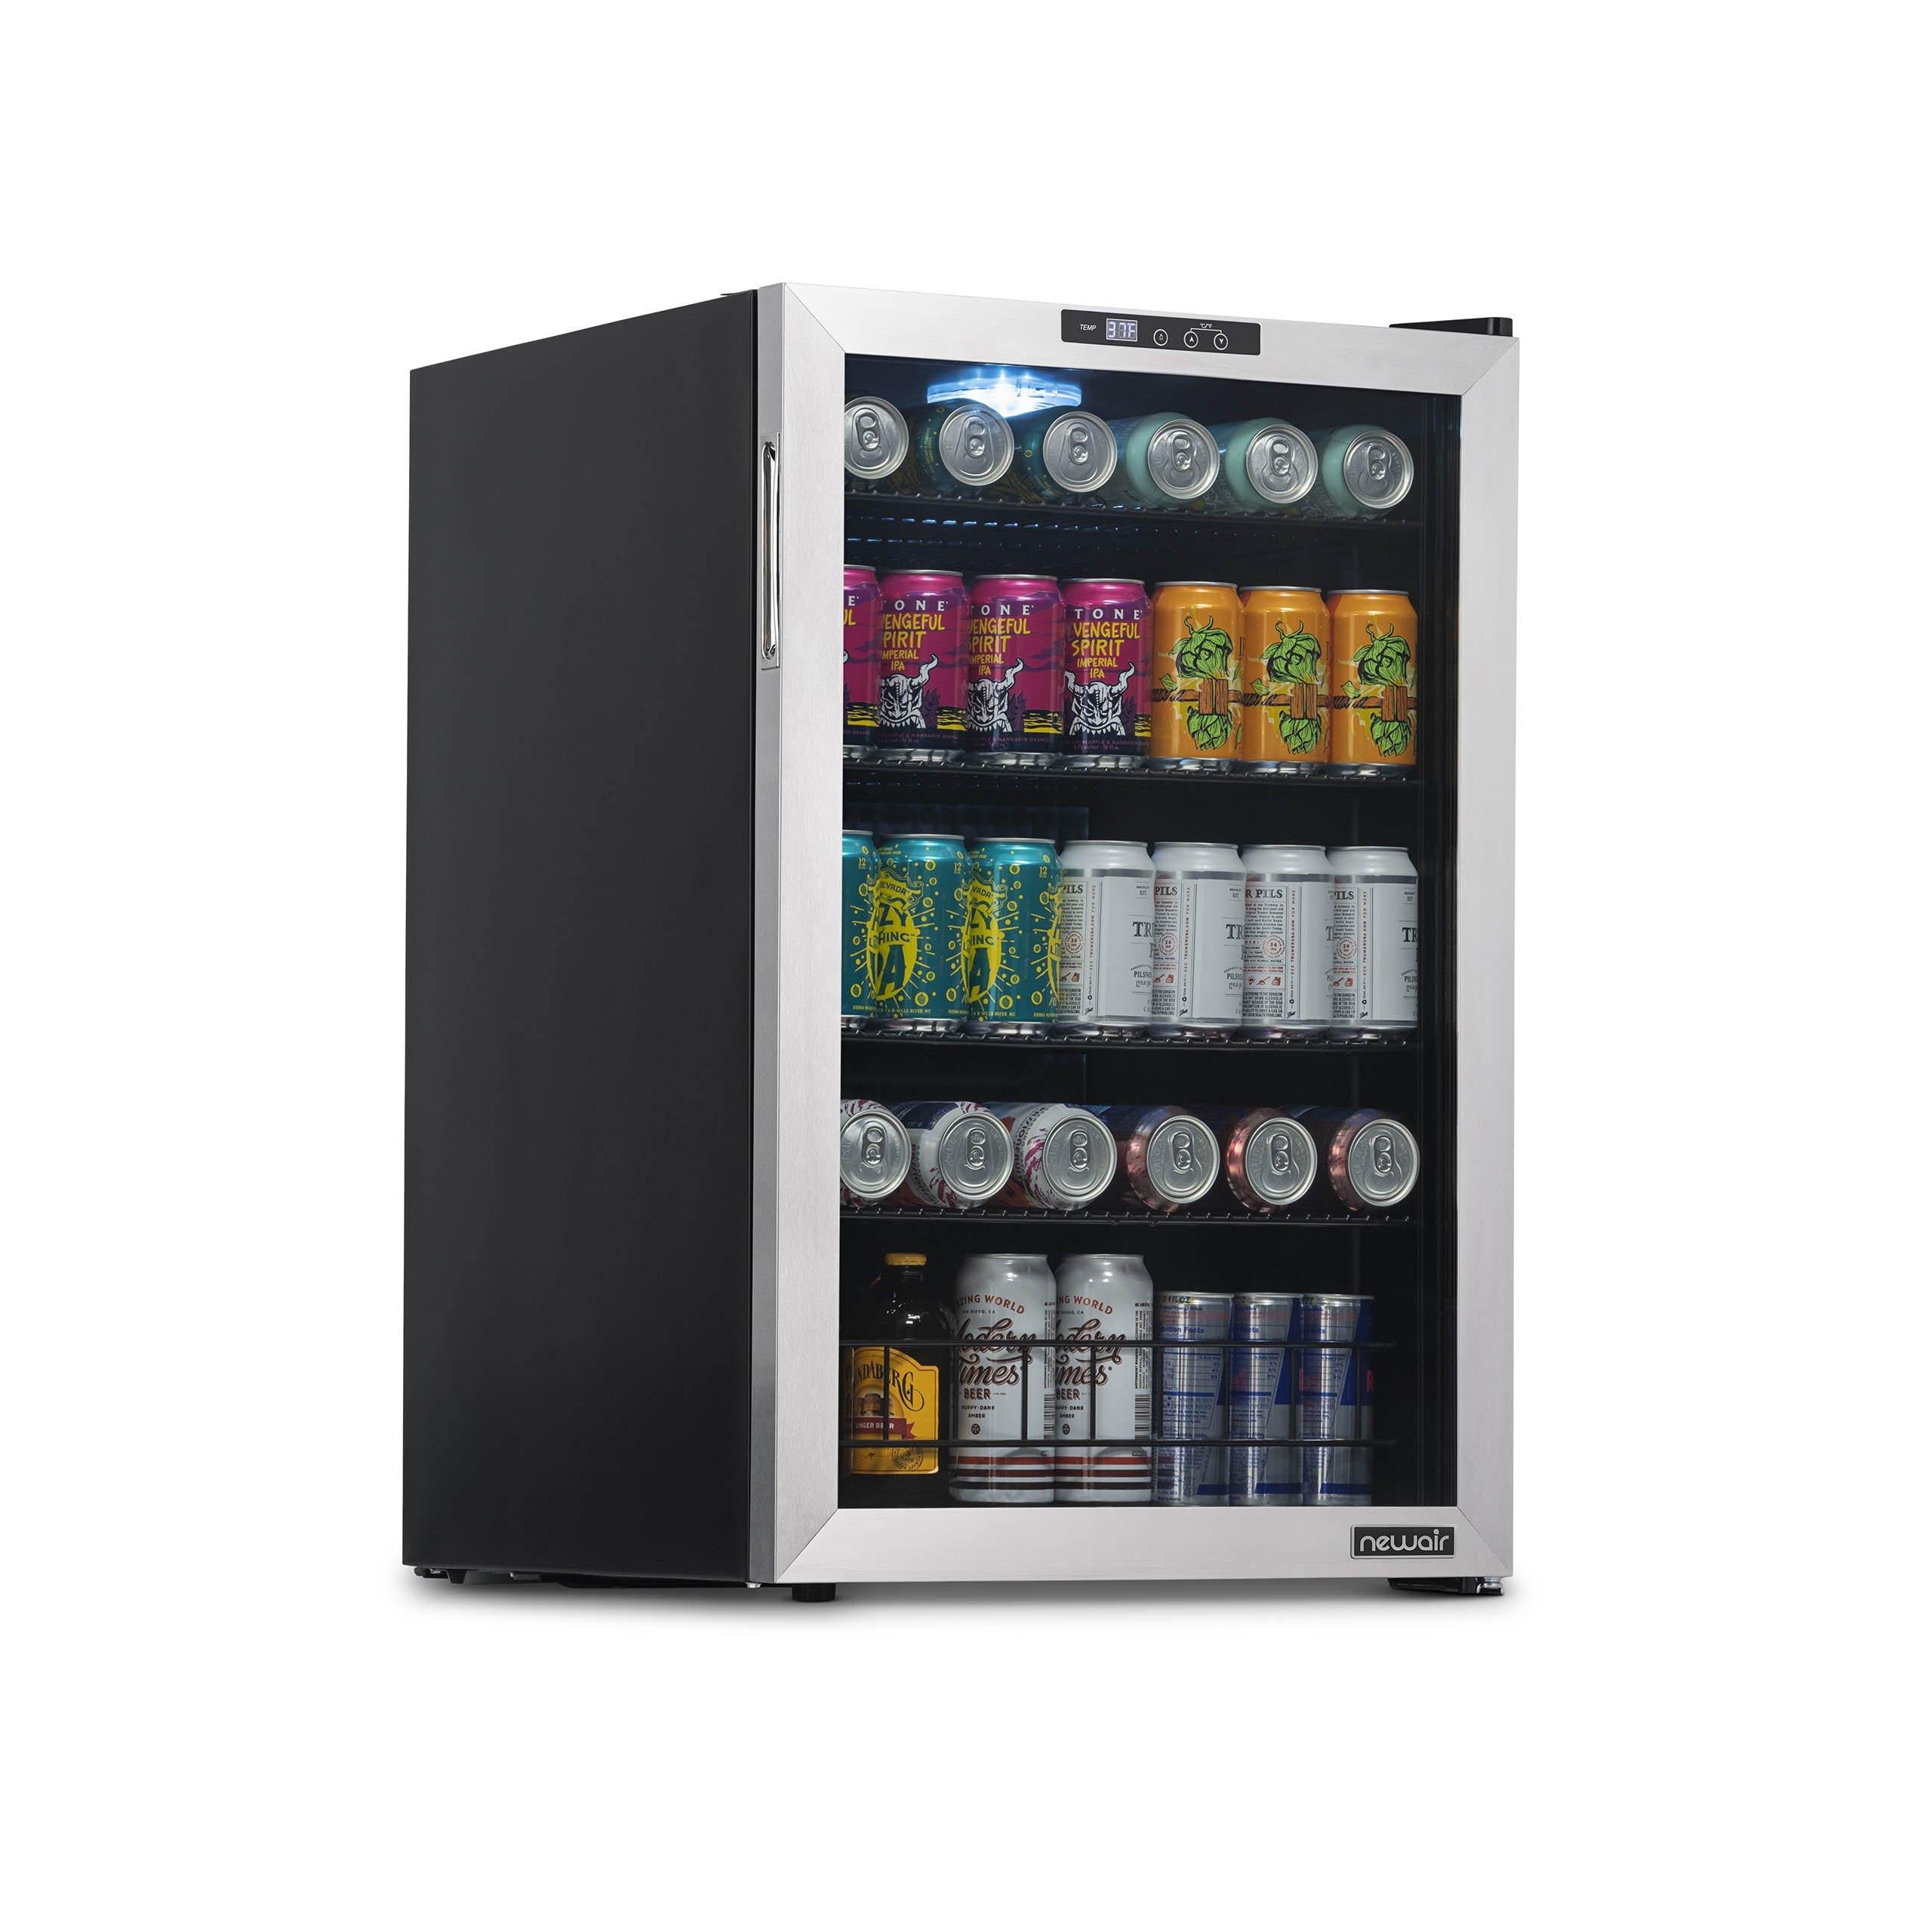 NewAir  160 Can Freestanding Beverage Fridge in Stainless Steel with SplitShelf™ and Precision Digital Thermostat